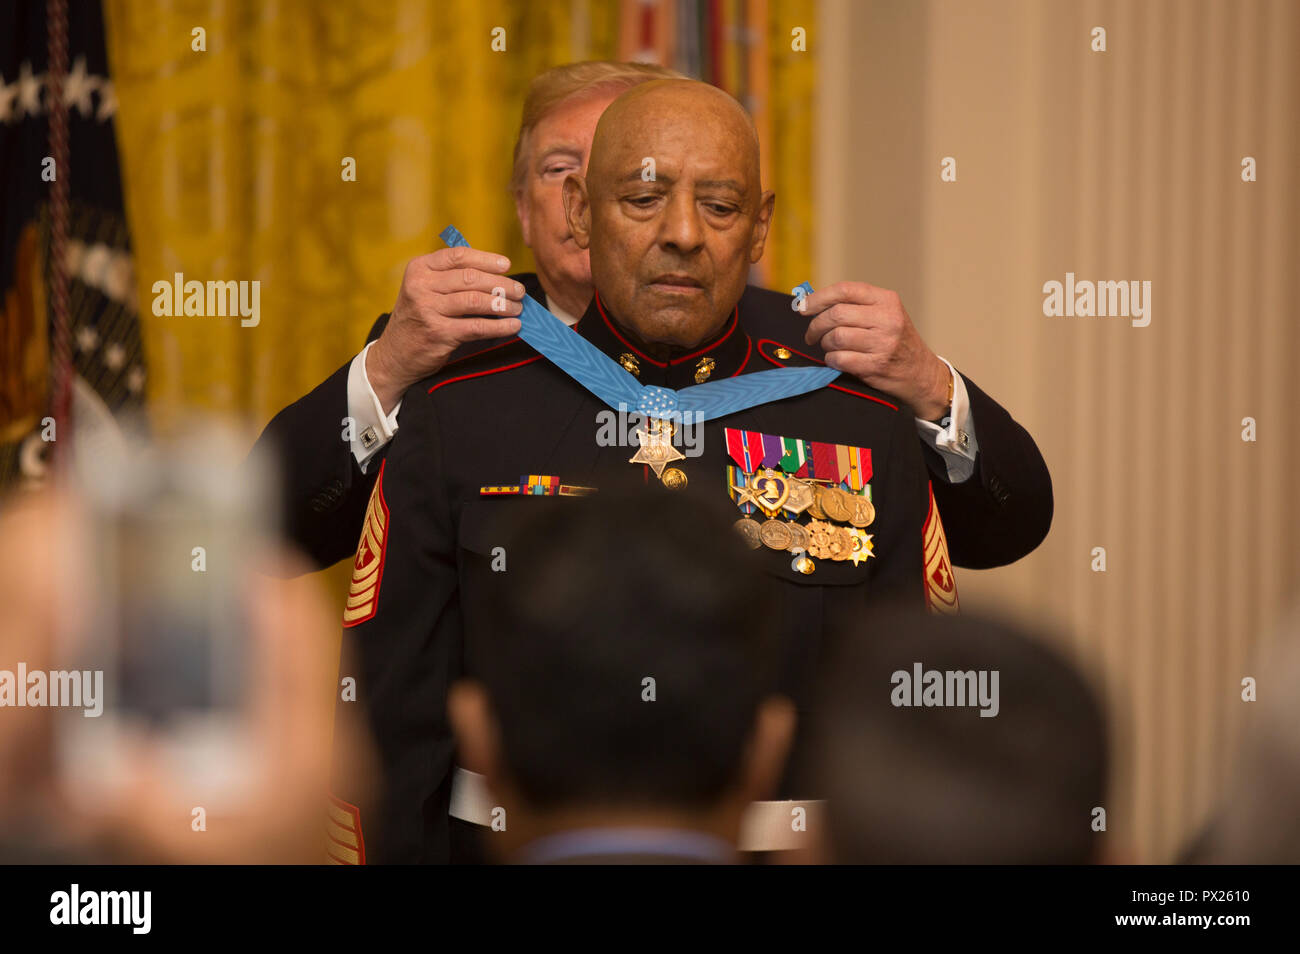 President of the United States Donald J. Trump places the Medal of Honor around retired U.S. Marine Corps Sgt. Maj. John L. Canley's neck, the 300th Marine Medal of Honor recipient, at the White House in Washington, D.C., Oct. 17, 2018. From Jan. 31, to Feb. 6 1968 in the Republic of Vietnam, Canley, the company gunnery sergeant assigned to Alpha Company, 1st Battalion, 1st Marines, took command of the company, led multiple attacks against enemy-fortified positions, rushed across fire-swept terrain despite his own wounds and carried wounded Marines into Hue City, including his commanding offic Stock Photo